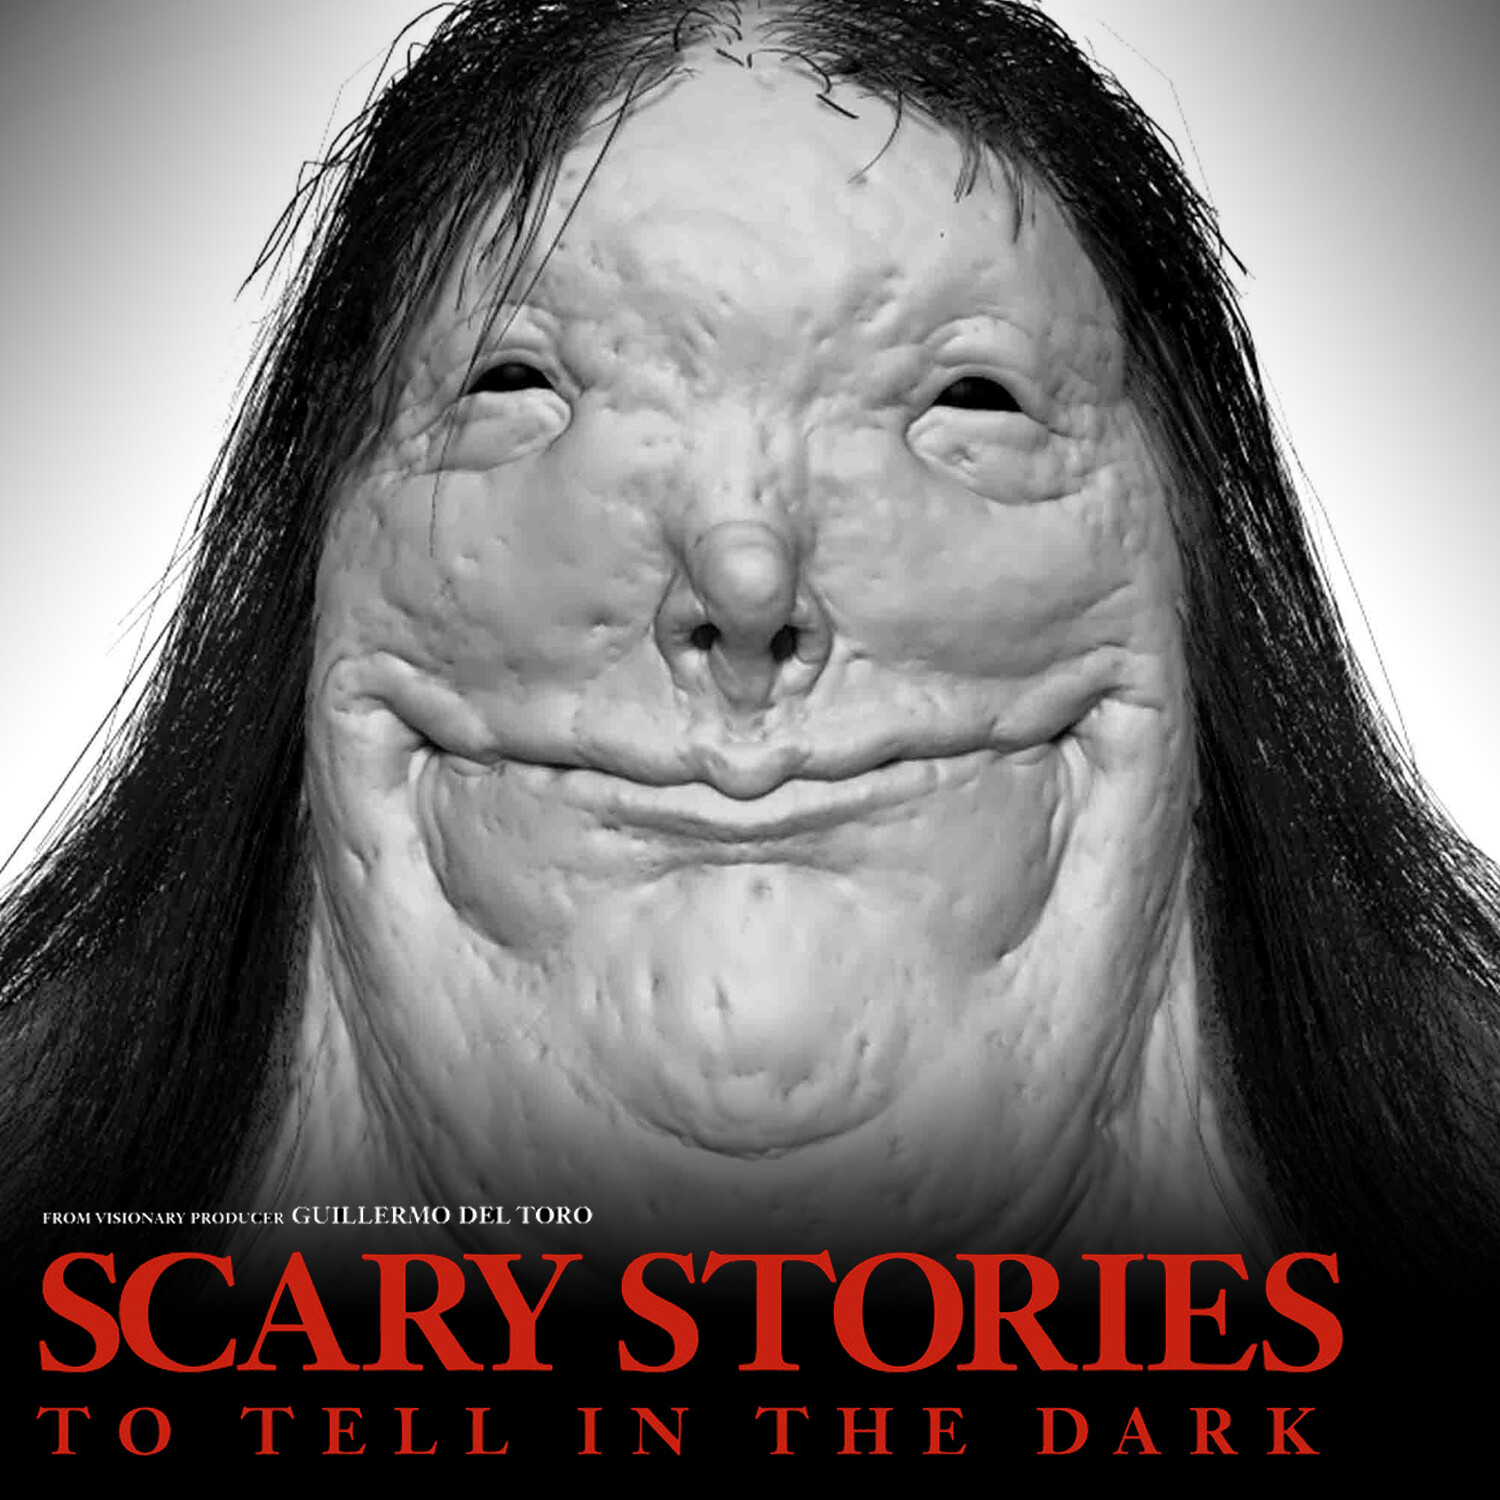 Exclusive] 'Scary Stories to Tell in the Dark' Featurette Introduces the  Unsettling Pale Lady - Bloody Disgusting